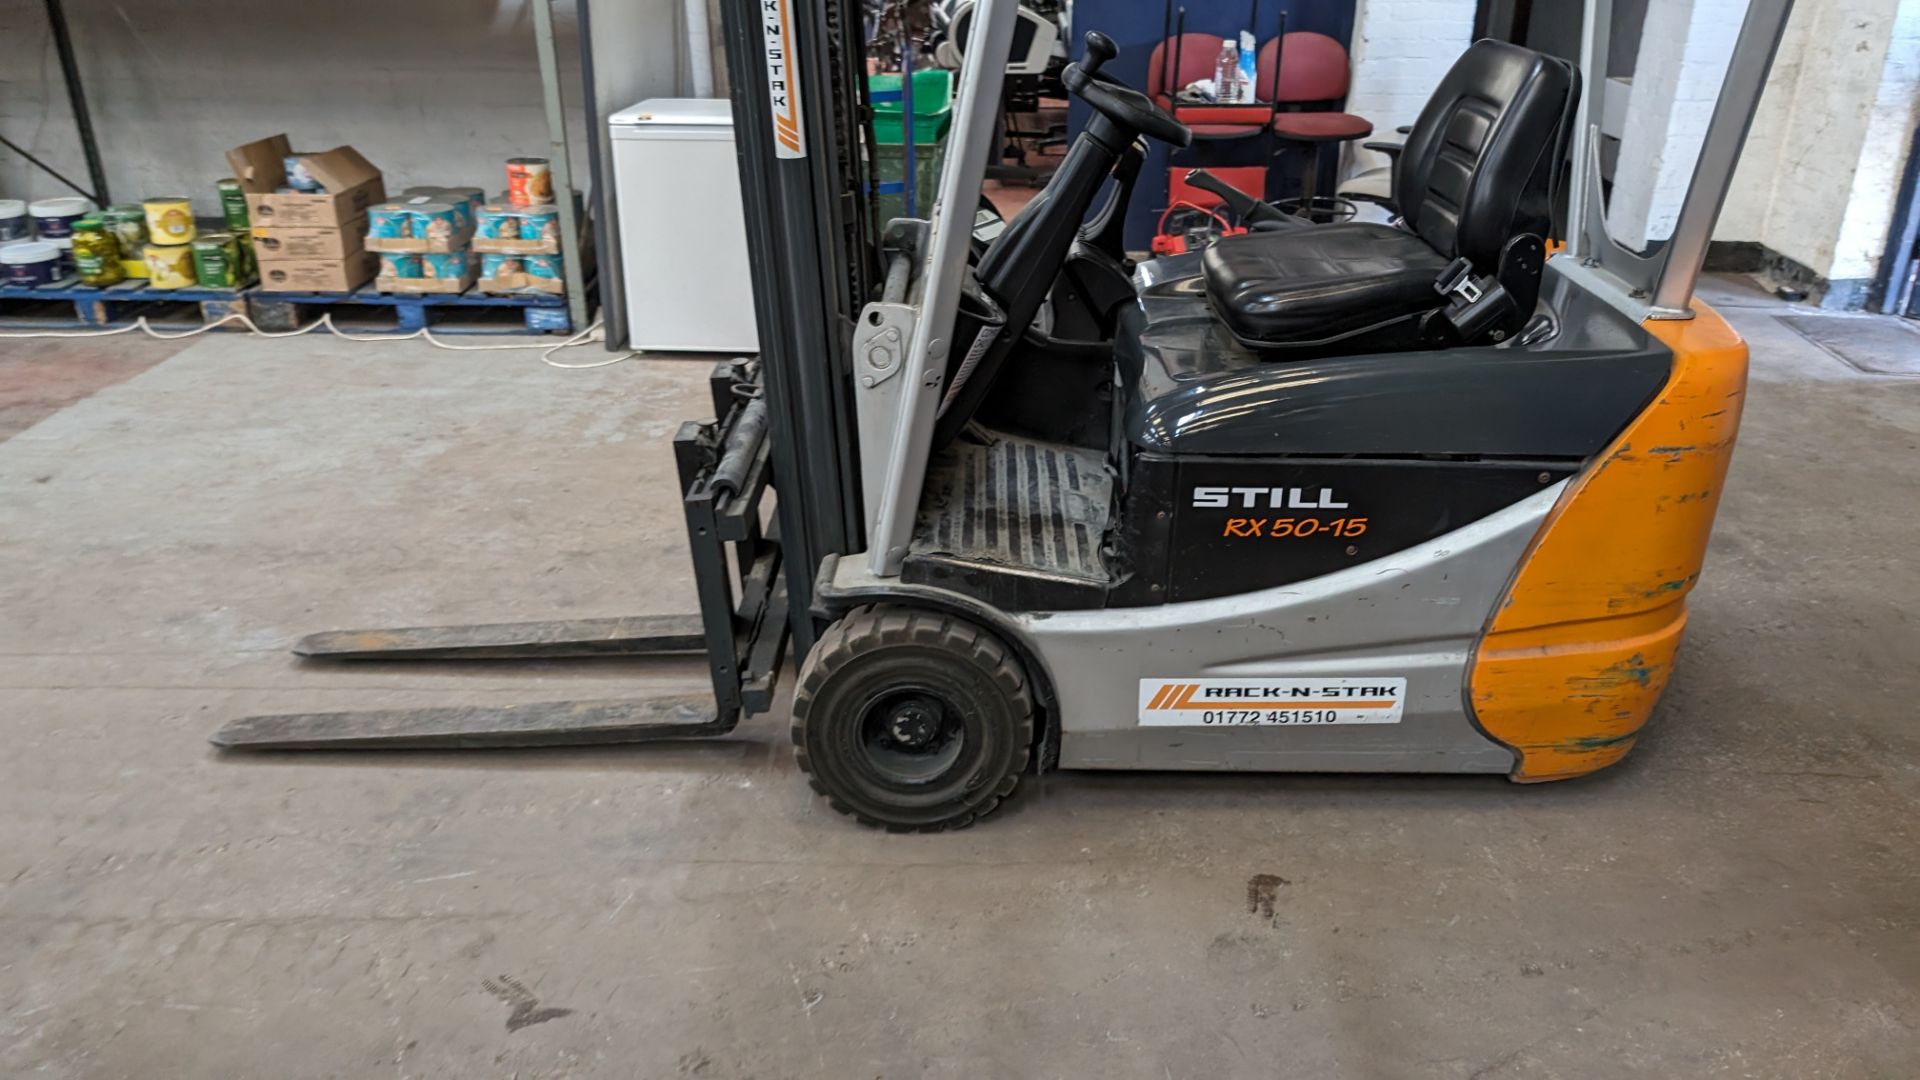 Still model RX-5015 3-wheel electric forklift truck with sideshift, 1.5 tonne capacity, including St - Bild 2 aus 18